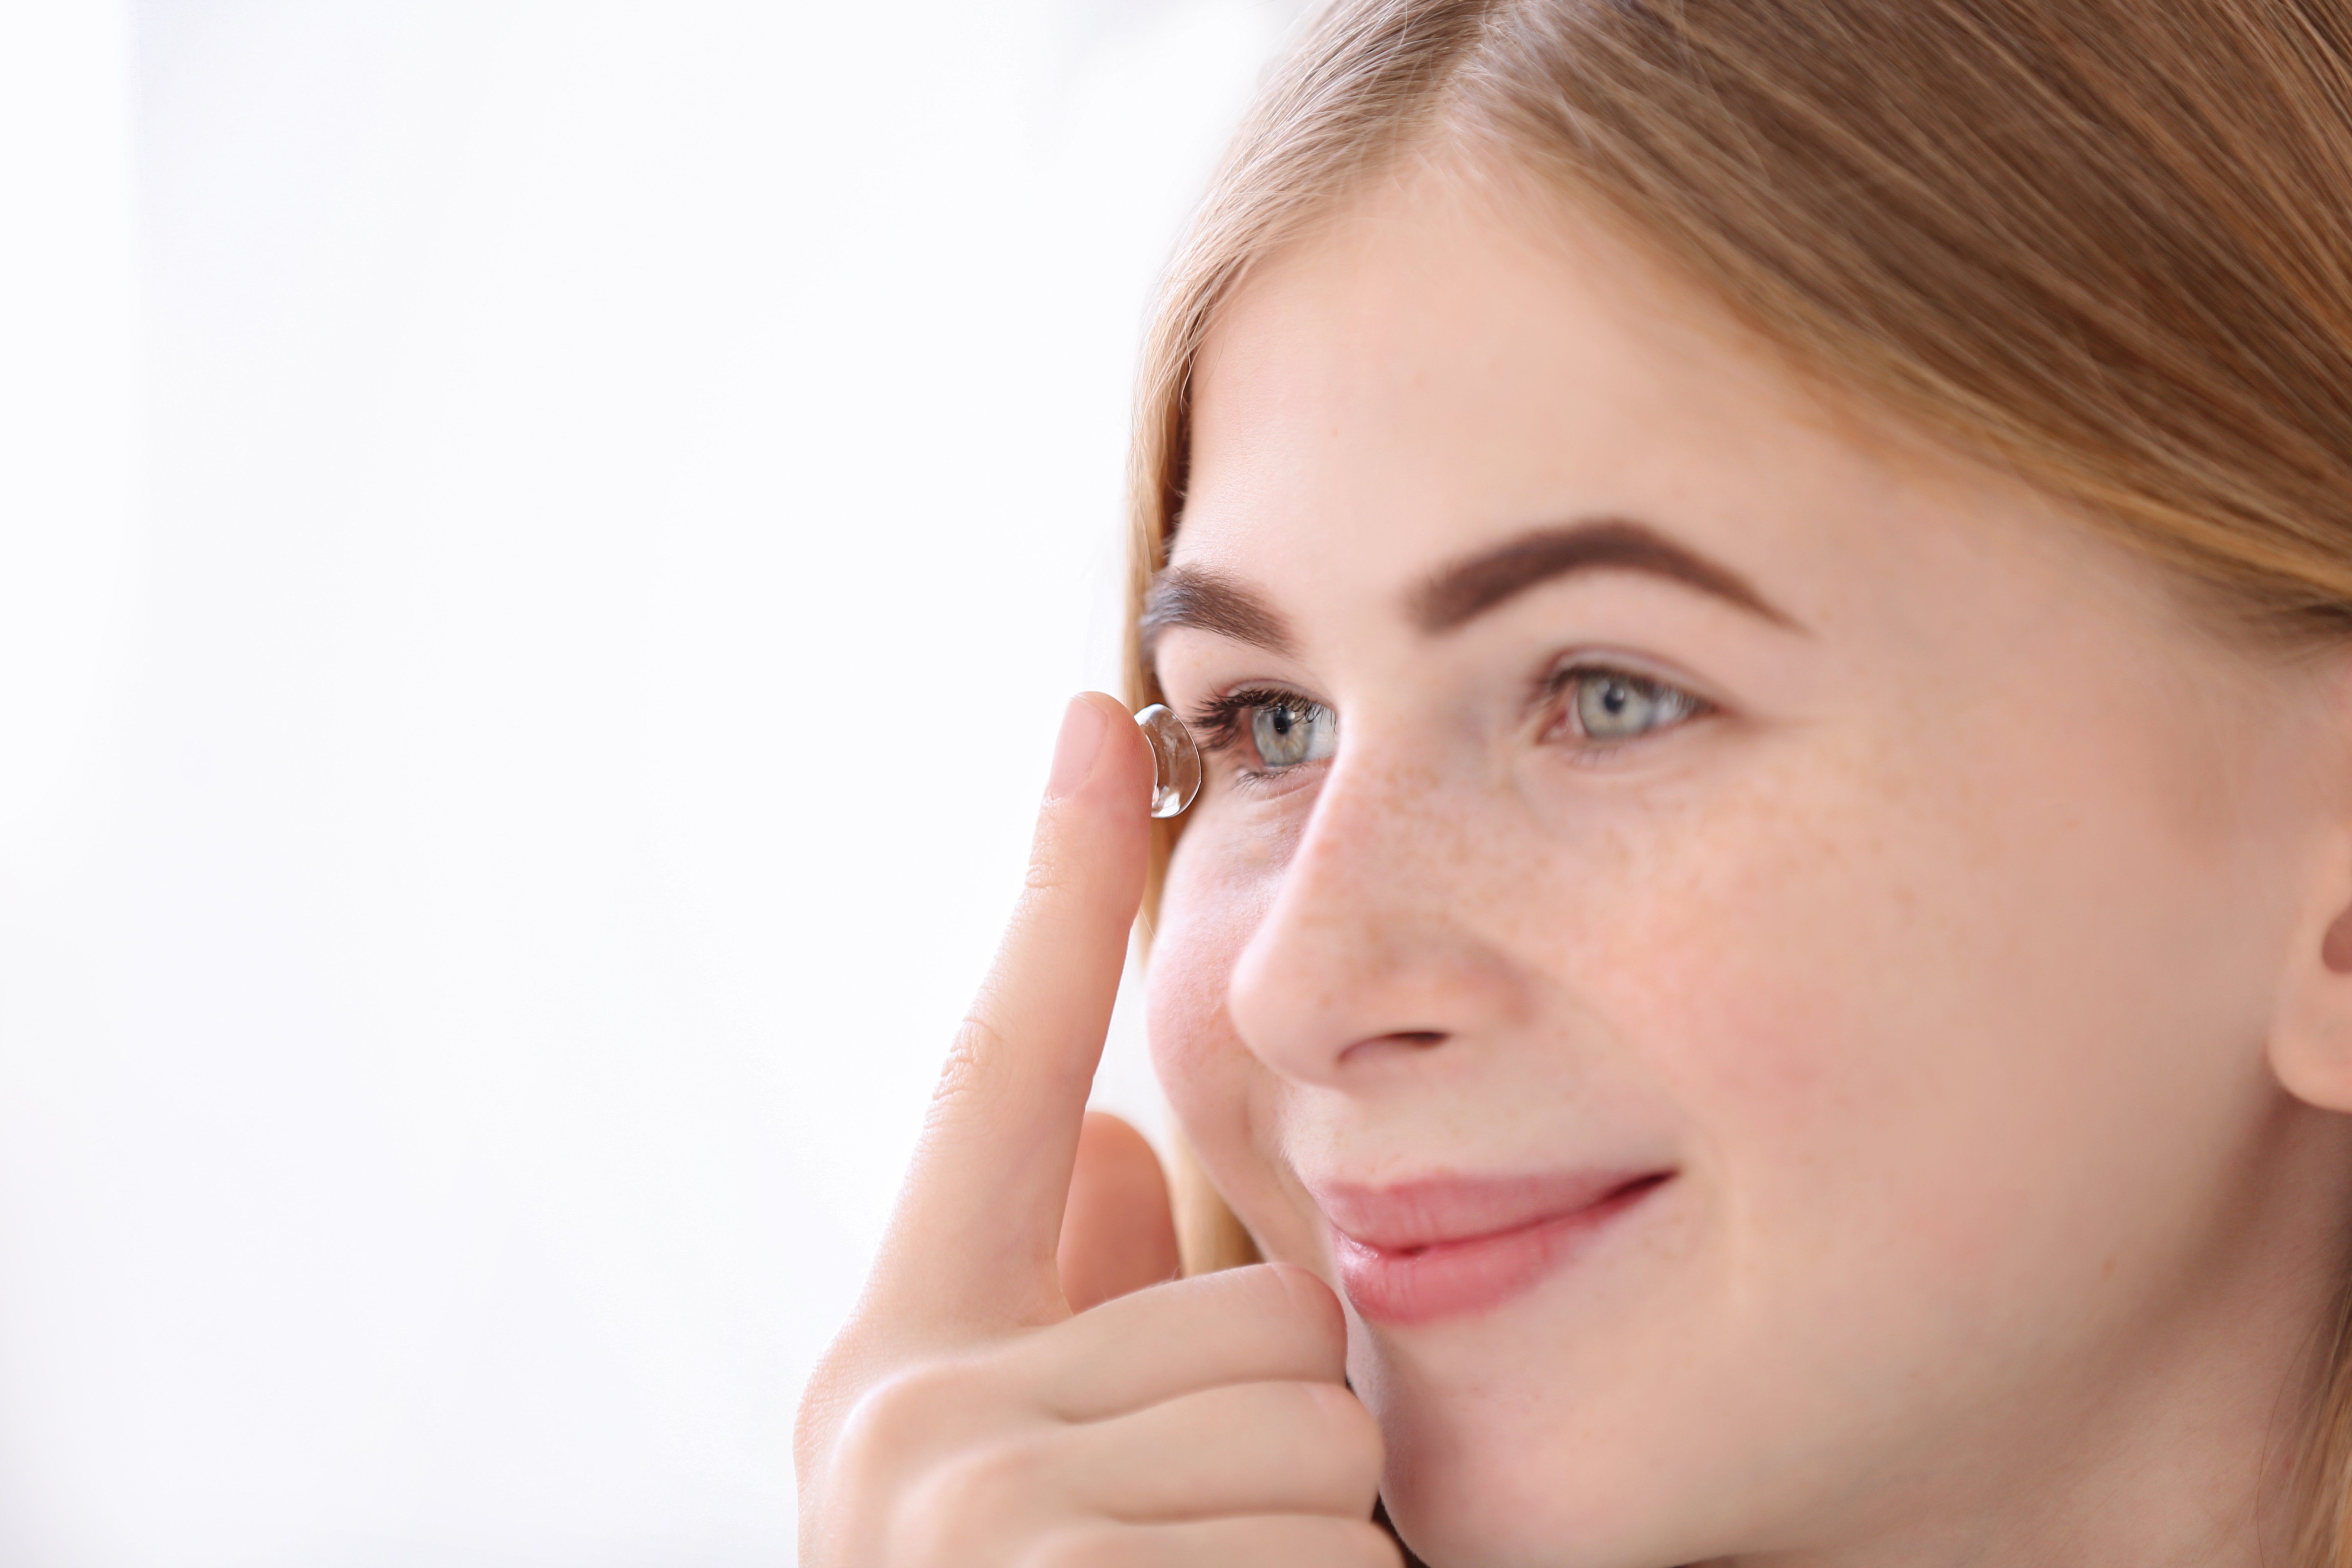 Can I Wear Contact Lenses If I Have Astigmatism?